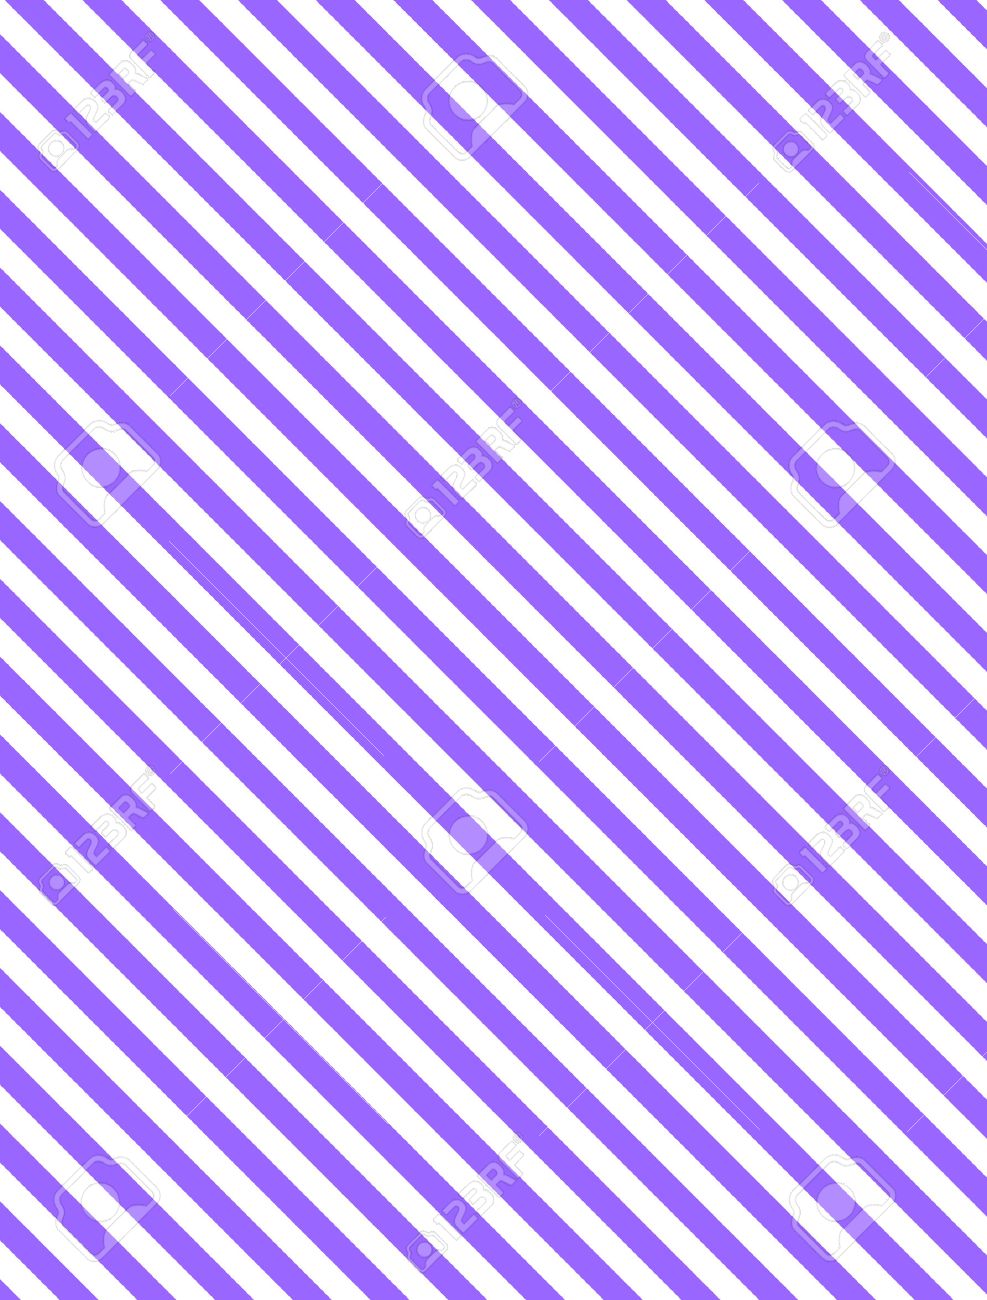 Seamless Continuous Diagonal Striped Background In Purple And